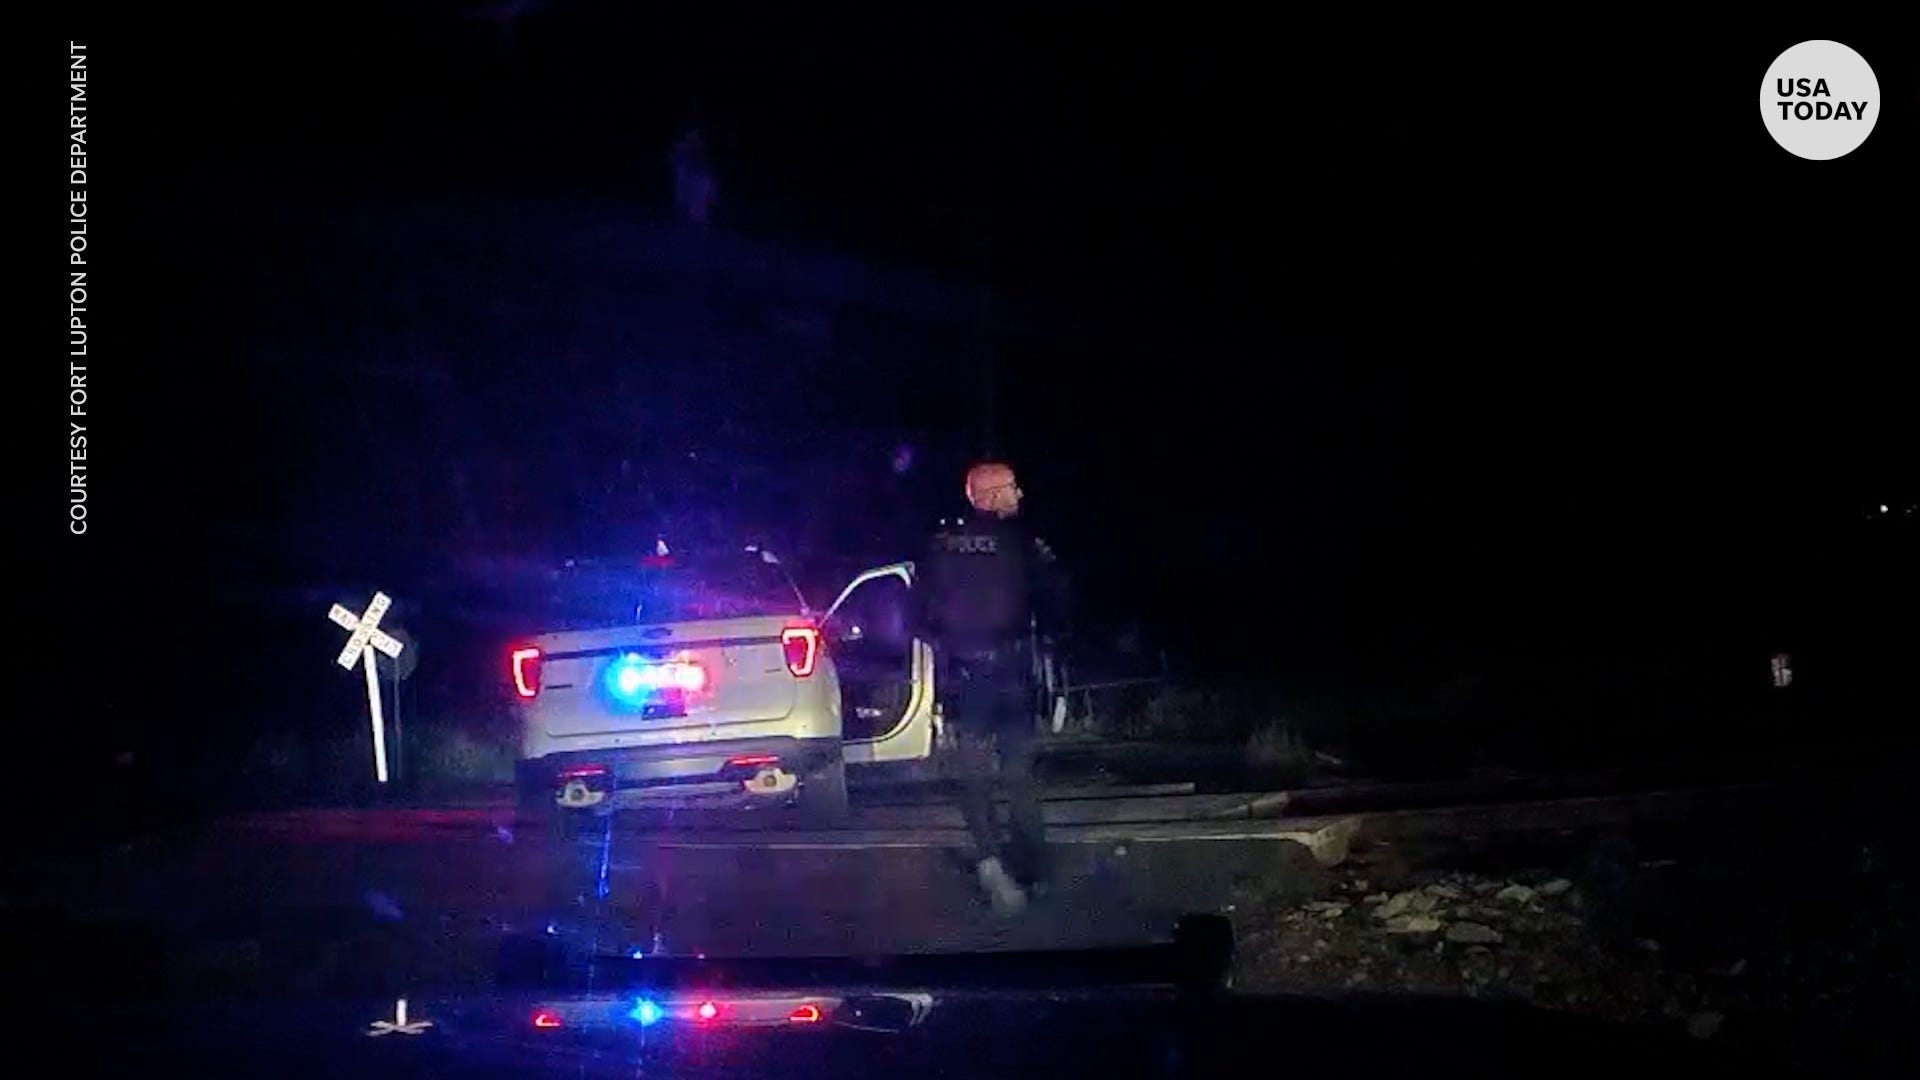 Train smashes into Colorado police cruiser with detained woman in the back seat